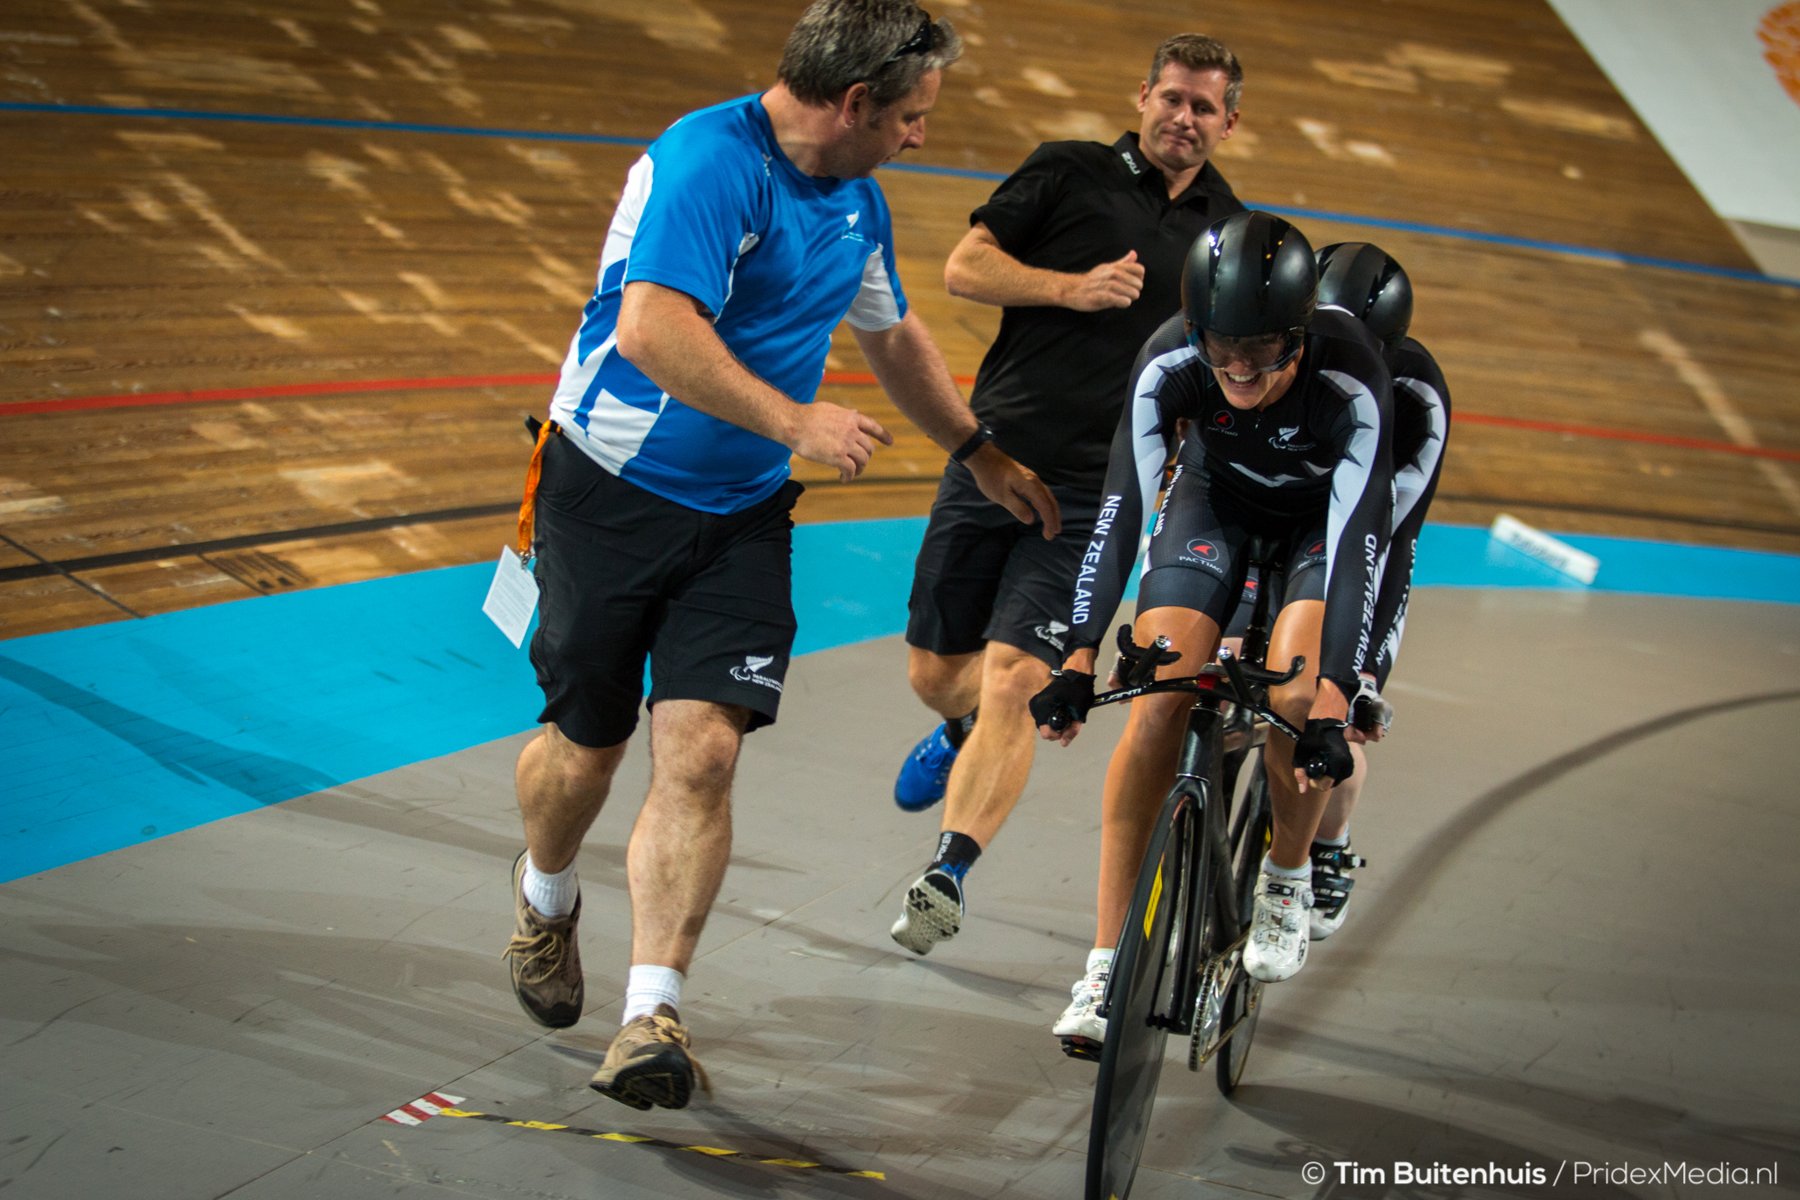 Brendon and another staff member run alongside a tandem bike at the velodrome